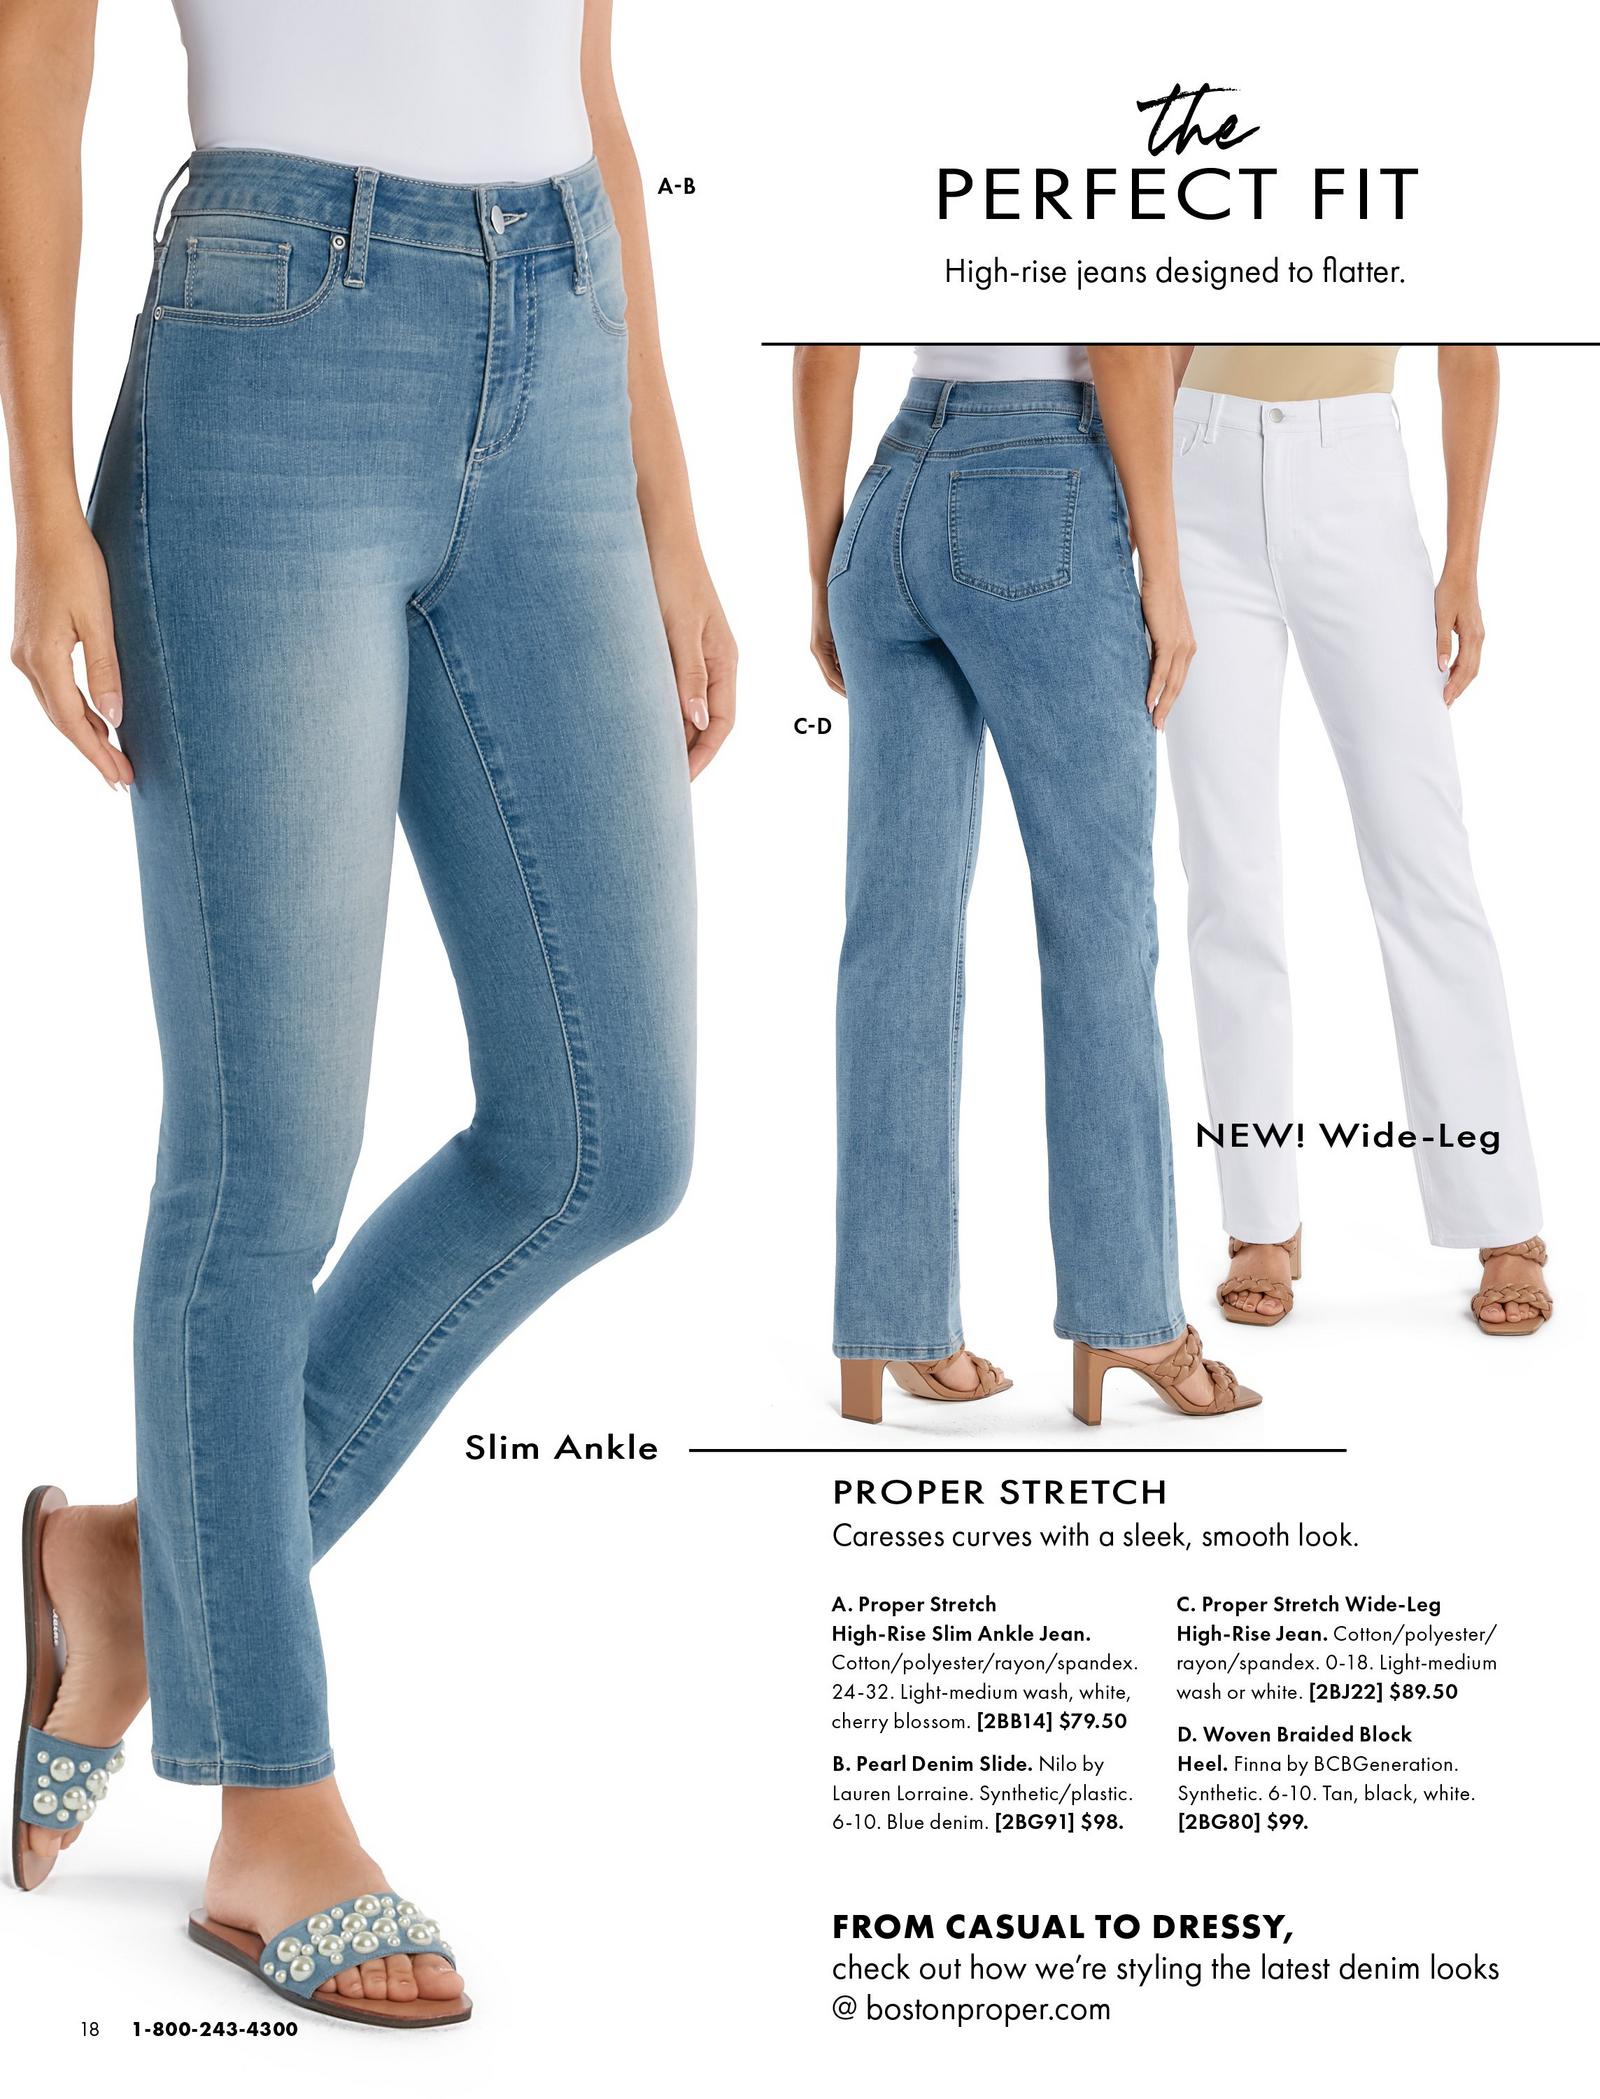 from left to right: light wash slim ankle jeans, light wash wide-leg jeans, white wide-leg jeans, and dark wash pull-on jeans.